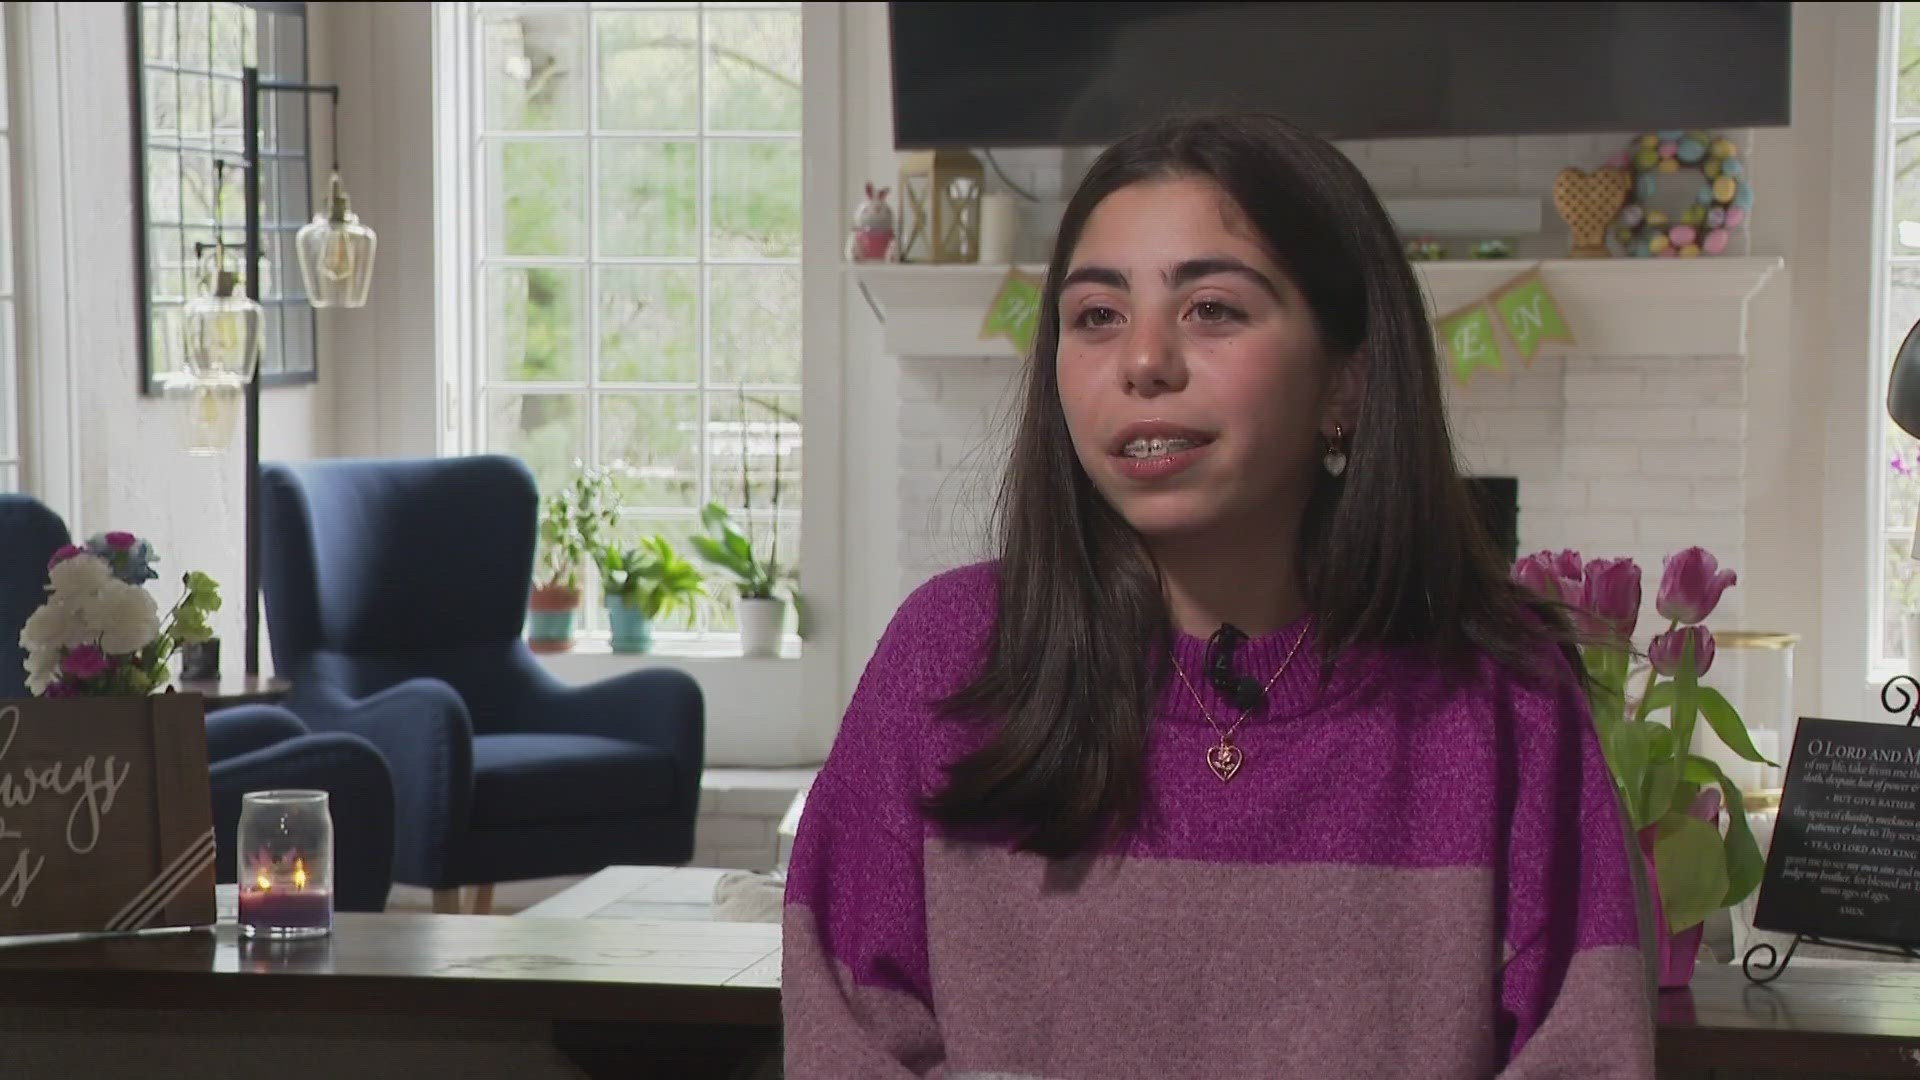 Rose Hajjar was born with a congenital heart defect. After several surgeries and complications, she needed a new heart. She got one.